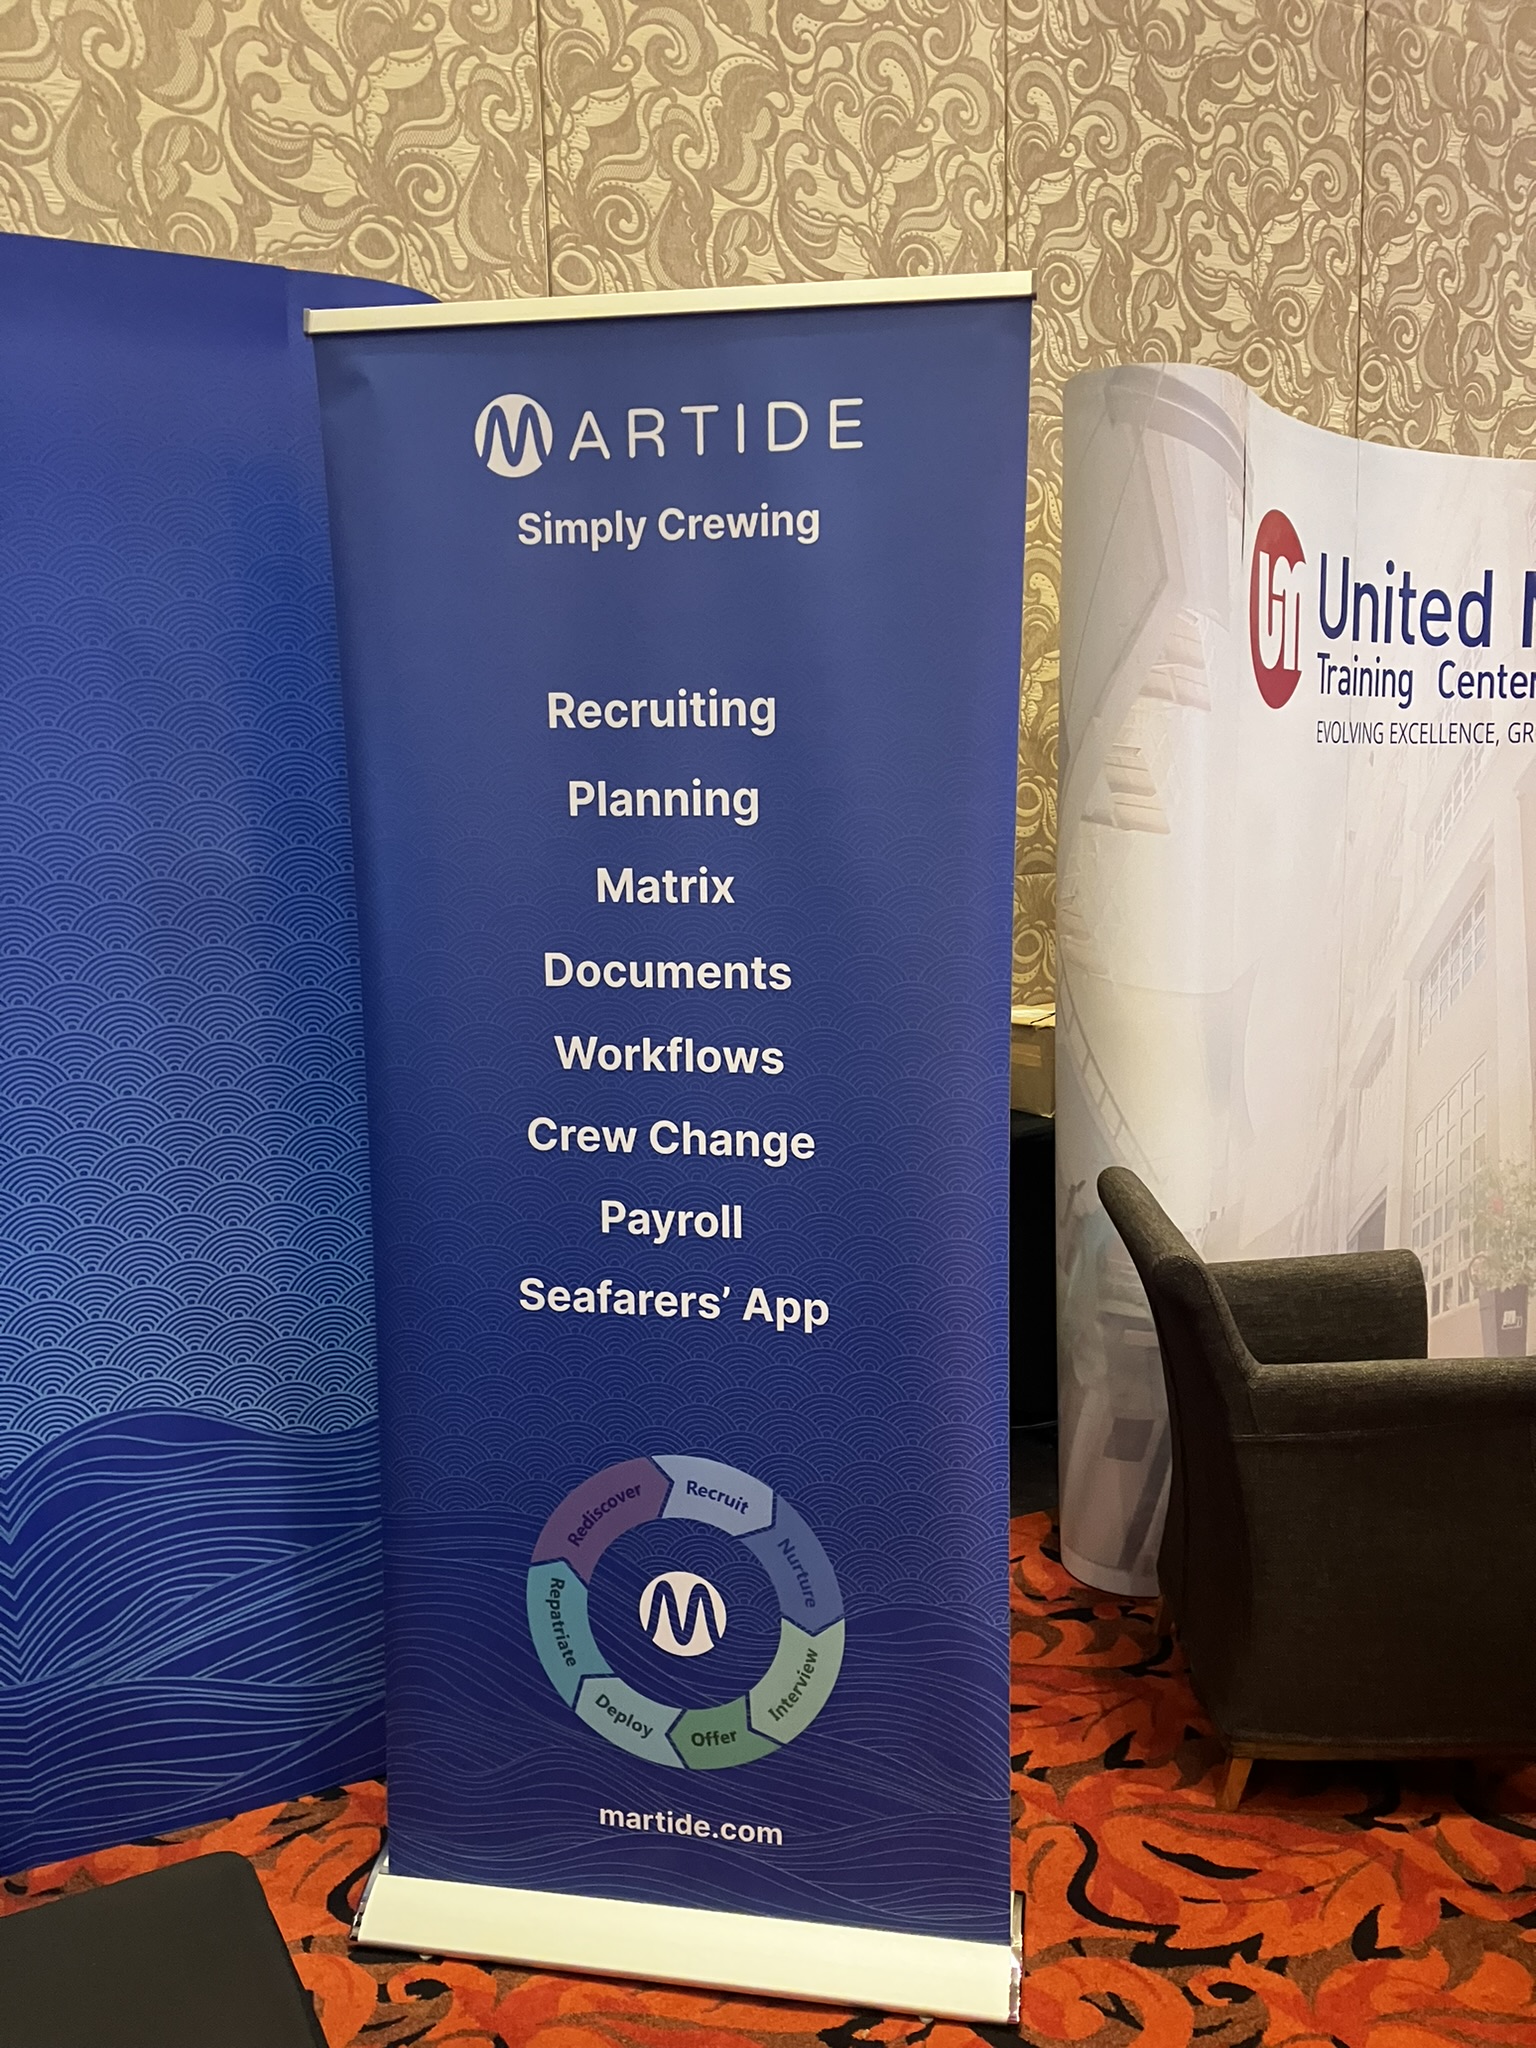 Martide Were Pleased to Exhibit at CrewConnect Global